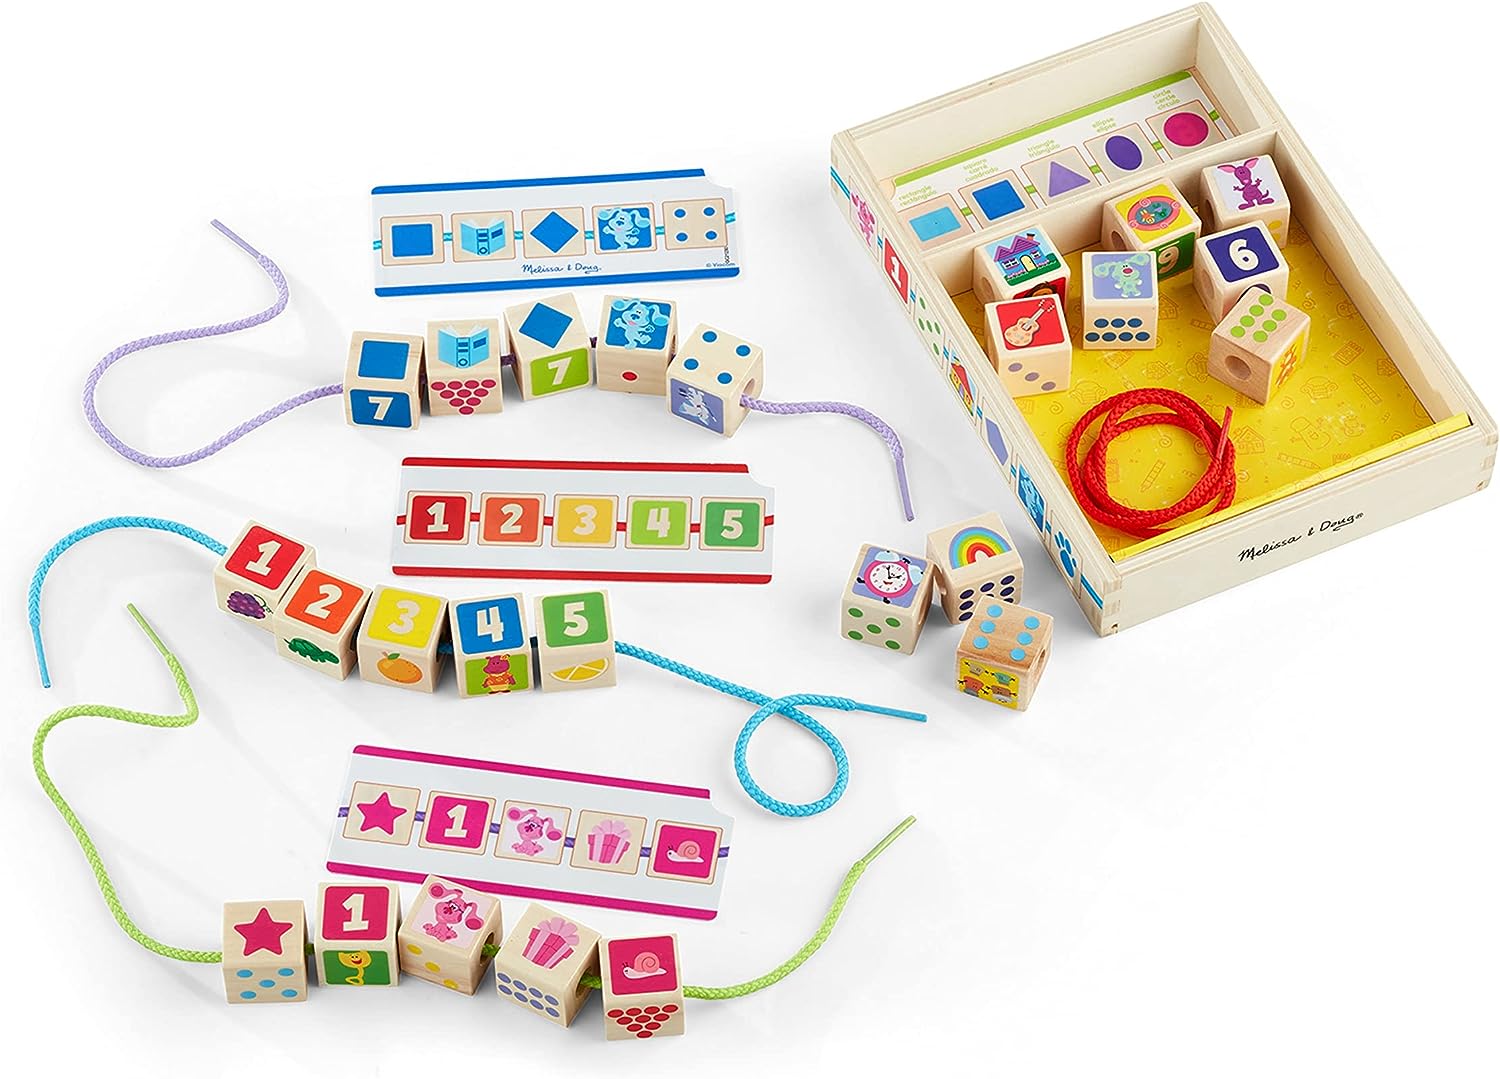 Melissa  Doug Blue’s Clues  You! Wooden Lacing Beads - 25 Beads, 4 Cords - Blues Clues Toys For Toddlers, Fine Motor Skills Toys For Kids Ages 3+ - FSC-Certified Materials